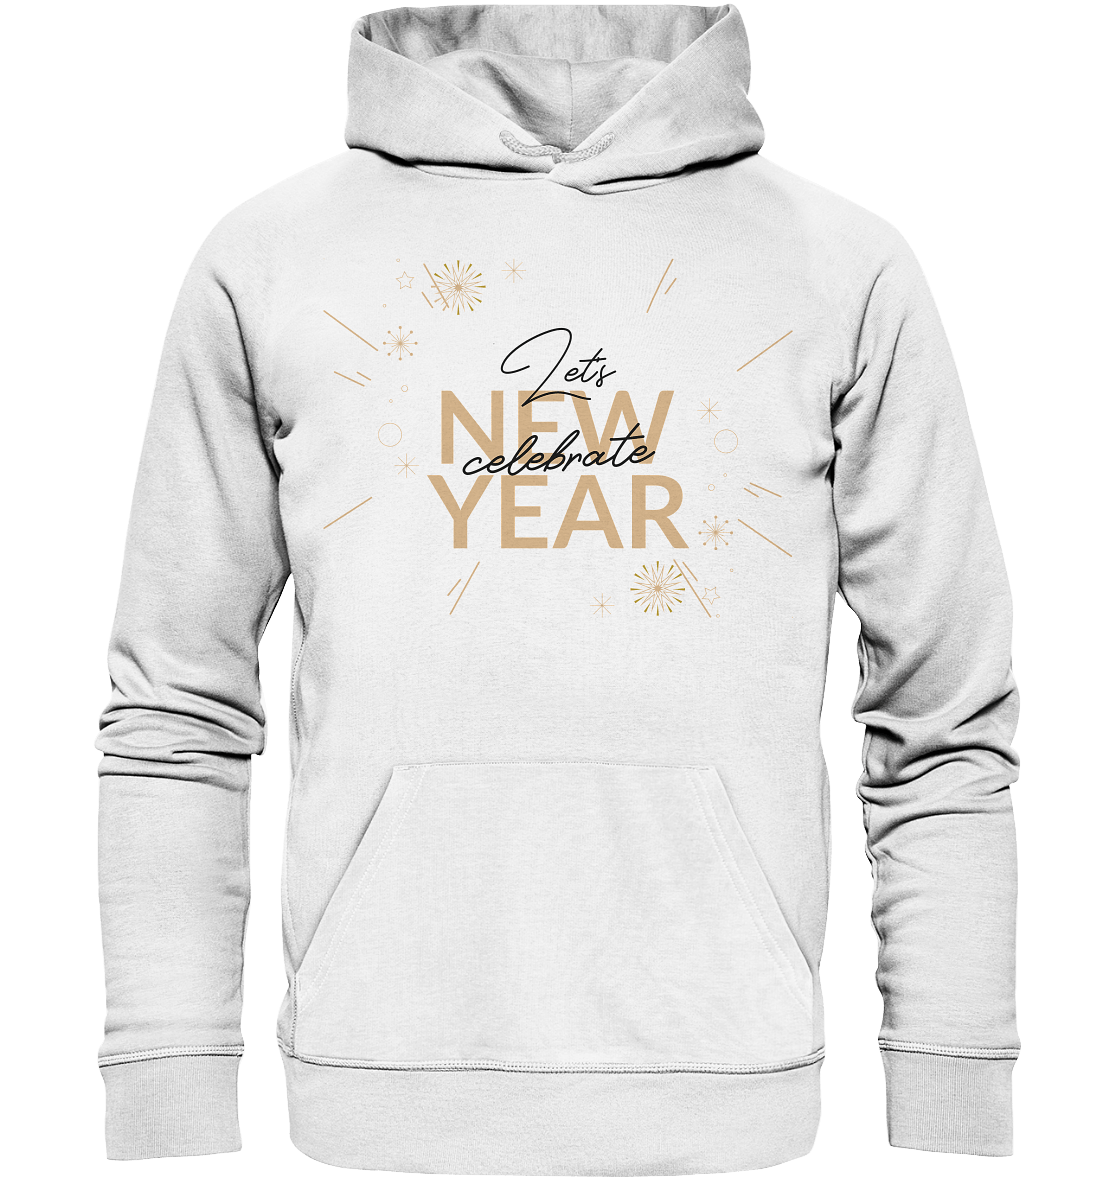 Silvester Kapuzenpullover in weiß mit Lettering  Happy New Year Let's celebrate